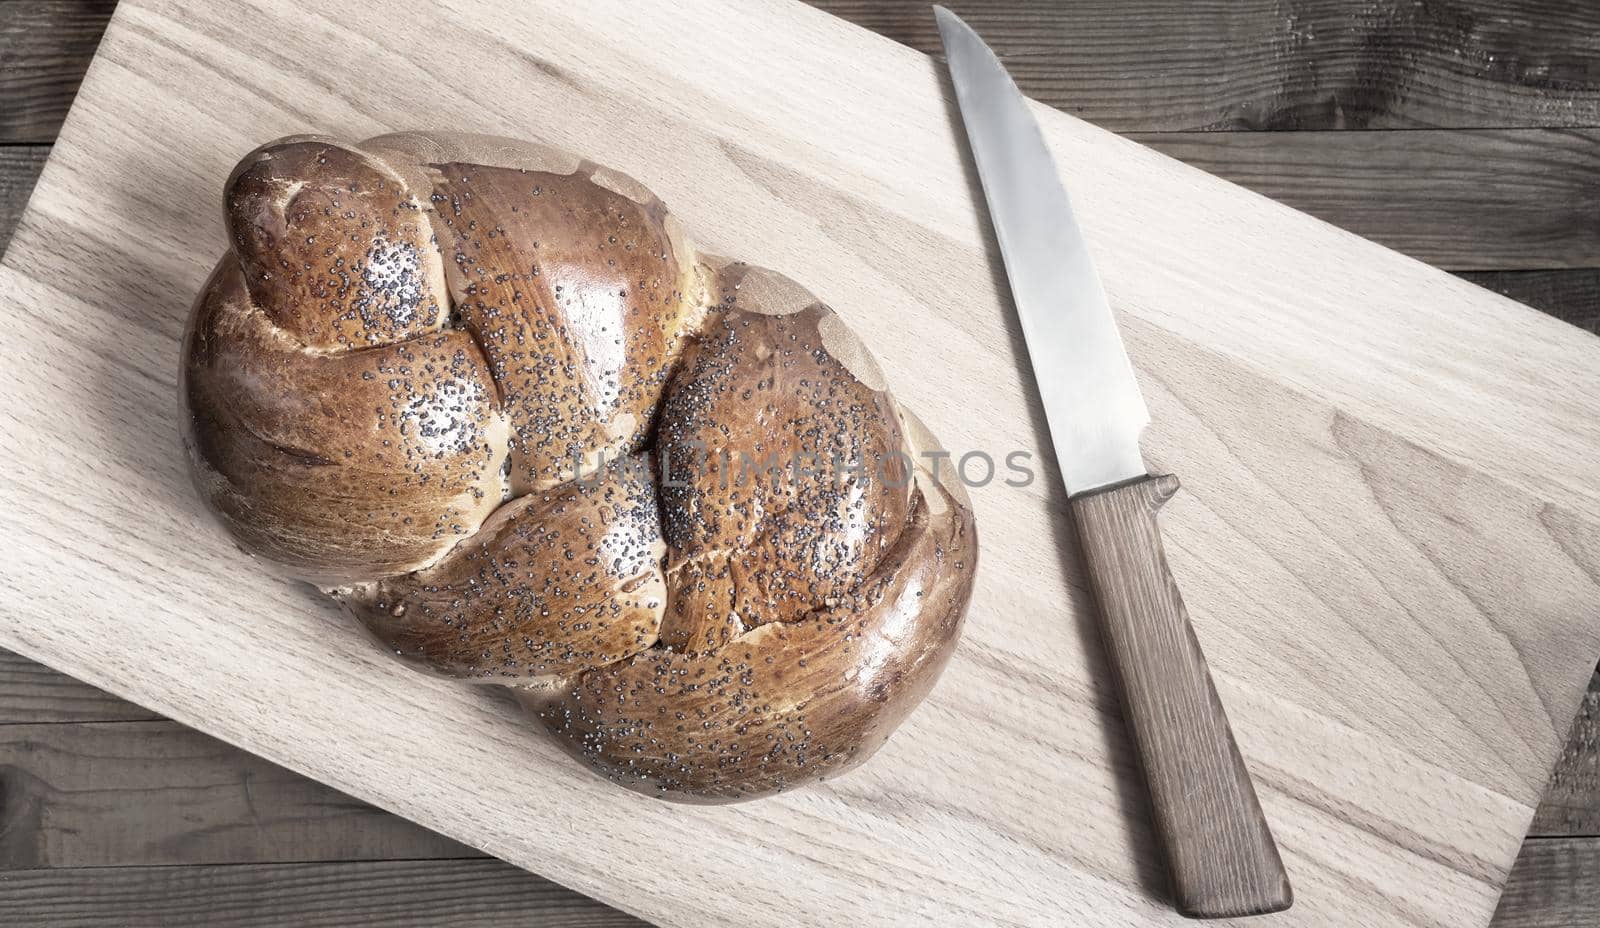 A loaf of white bread with a crisp crust, sprinkled with poppy seeds and a knife on the kitchen Board. Top view, copy space.